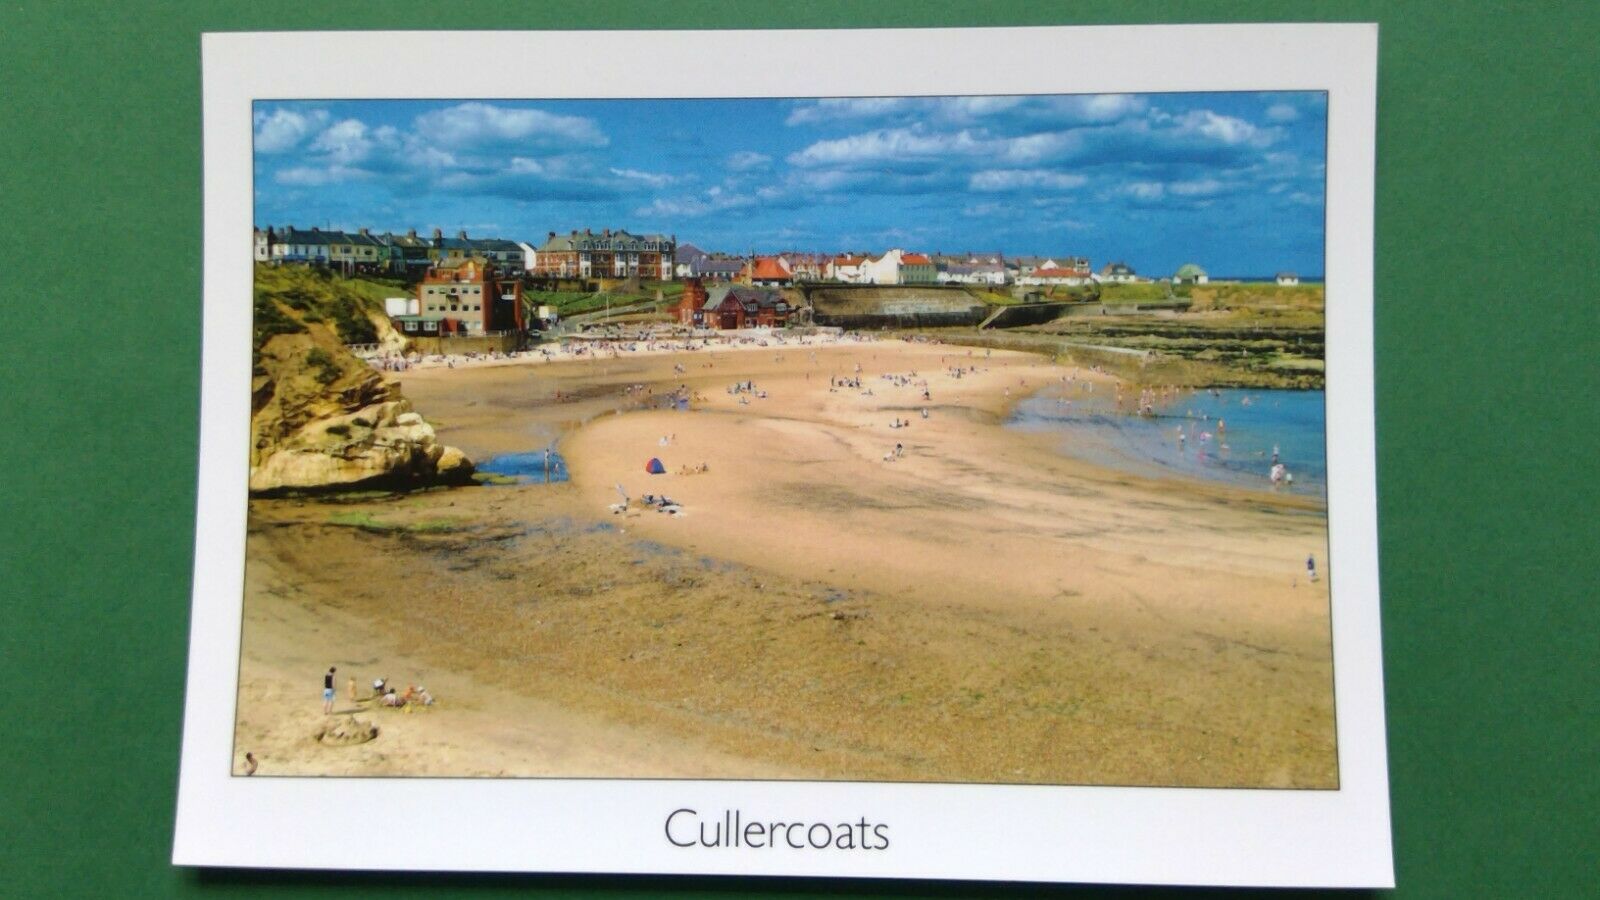 House Clearance - Cullercoats service. Tyne and Wear.